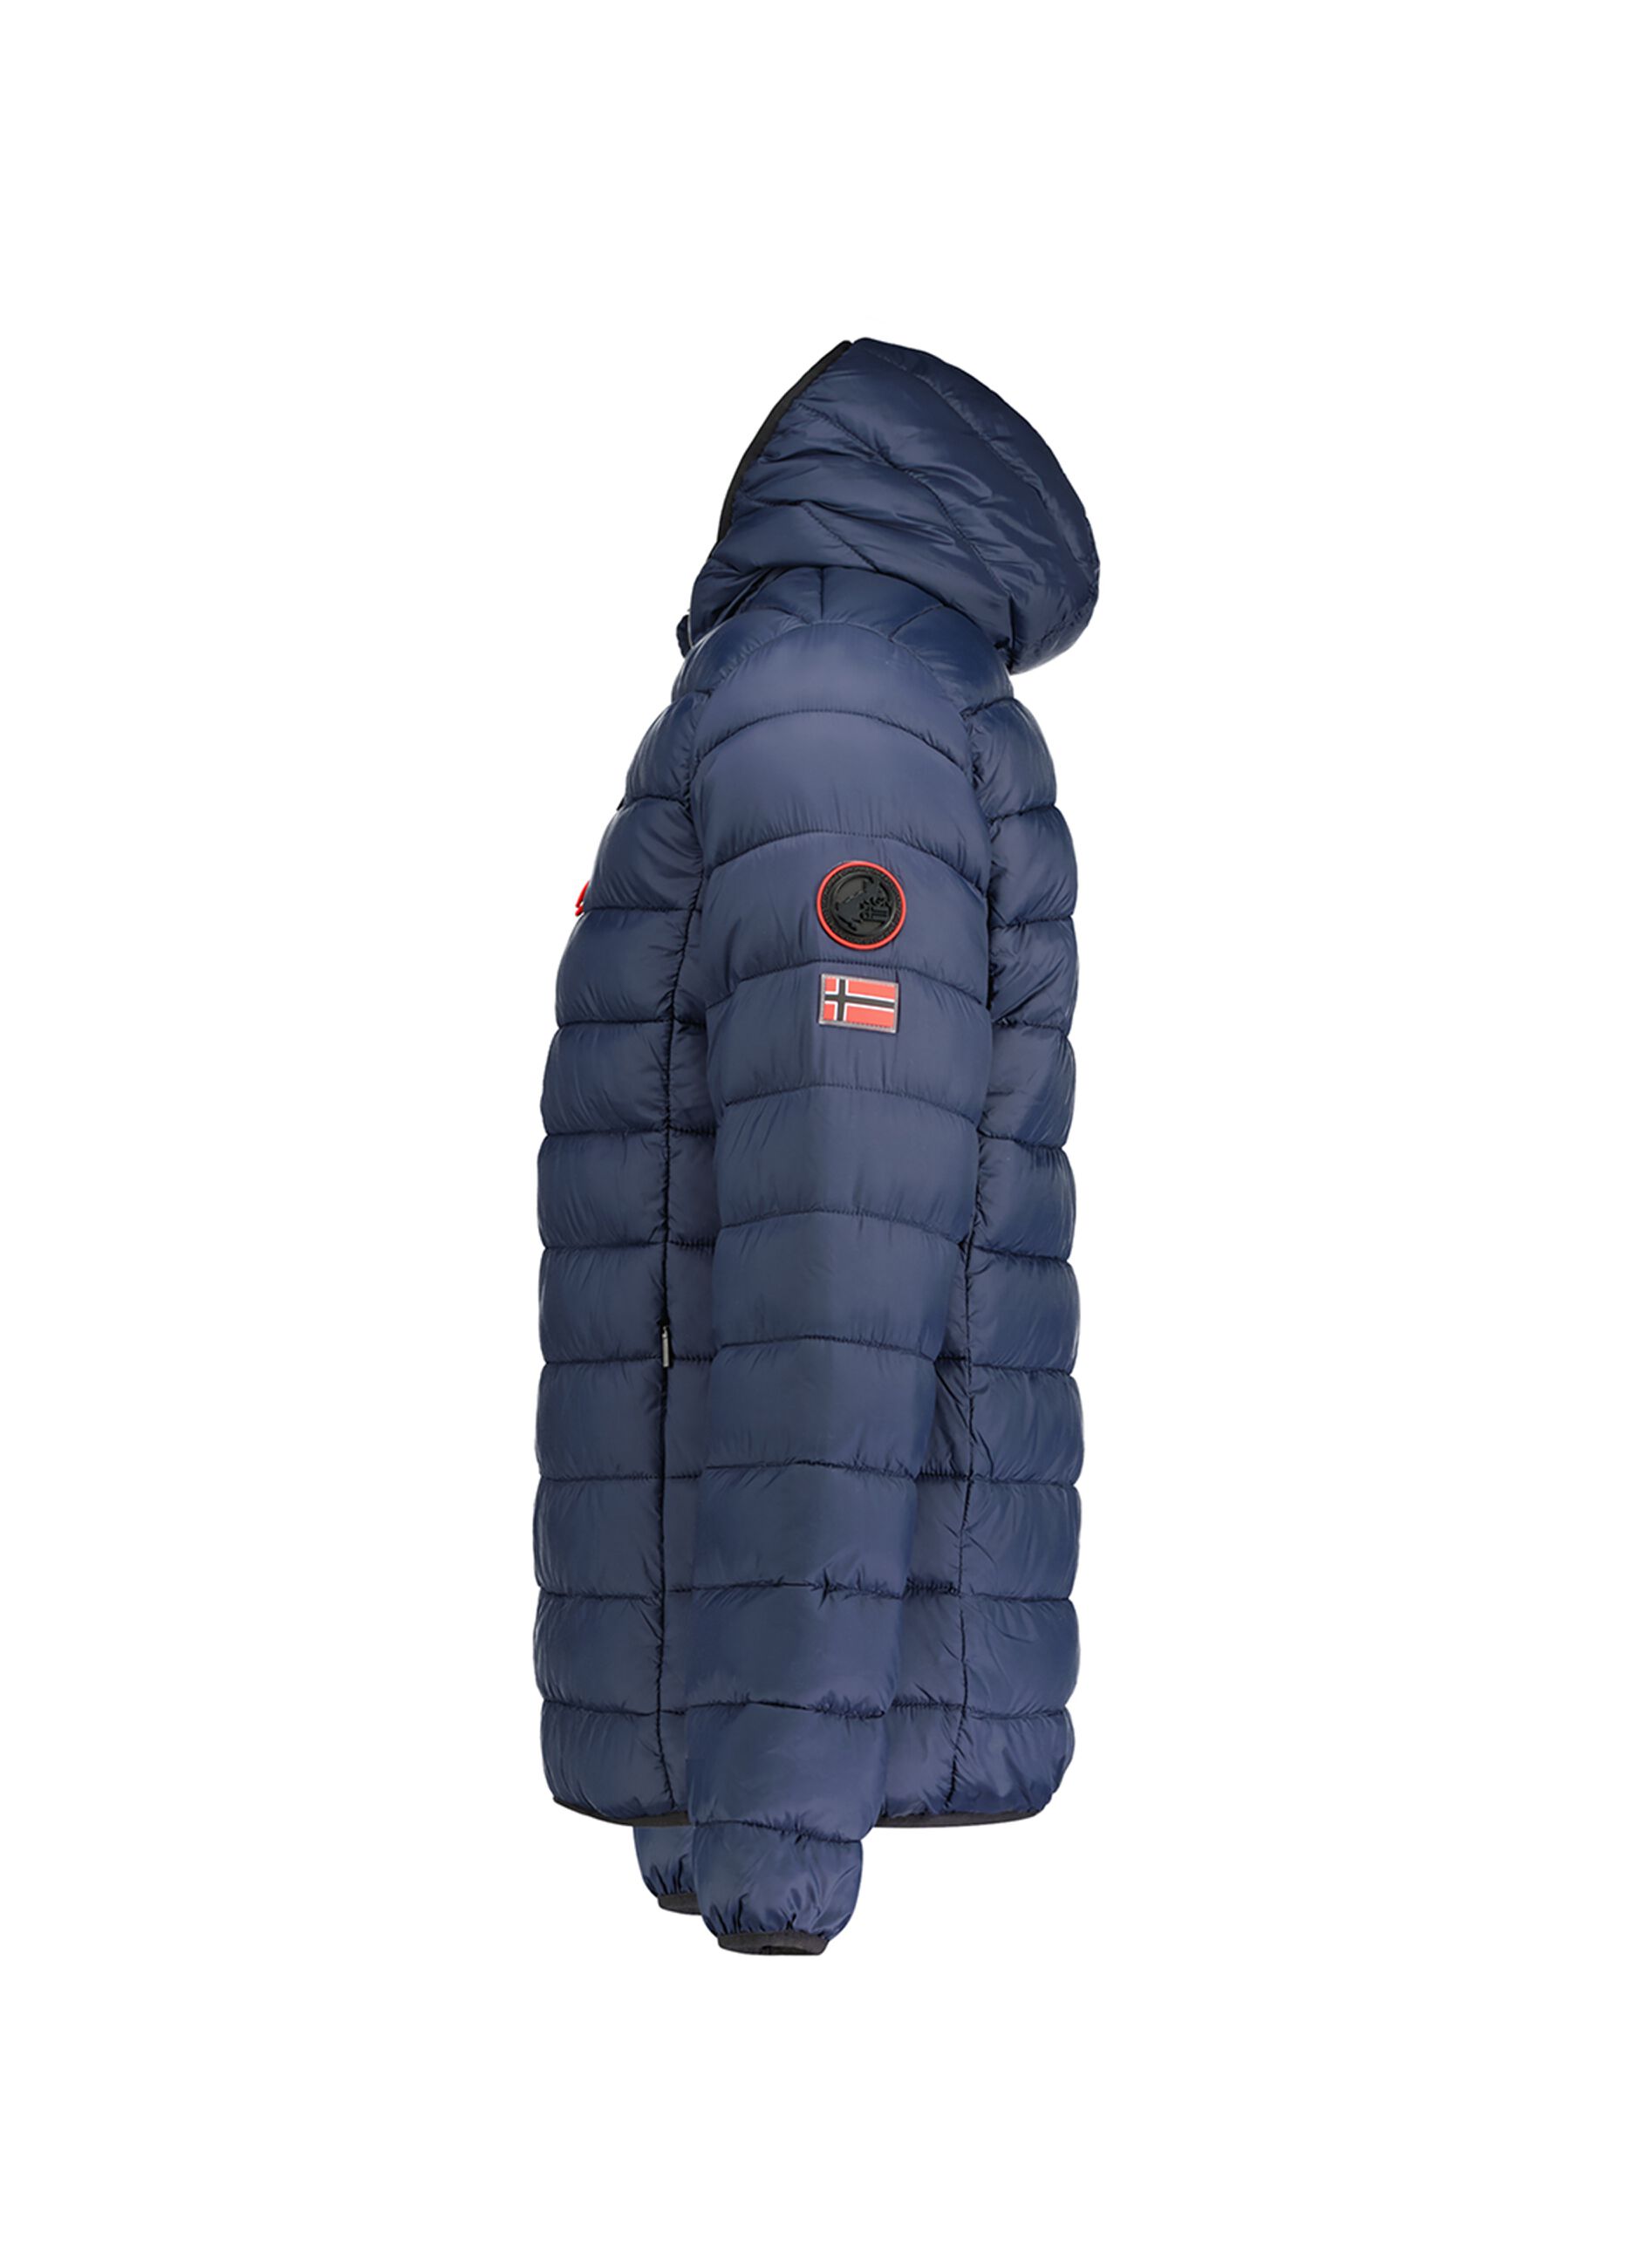 Geographical Norway down jacket with hood